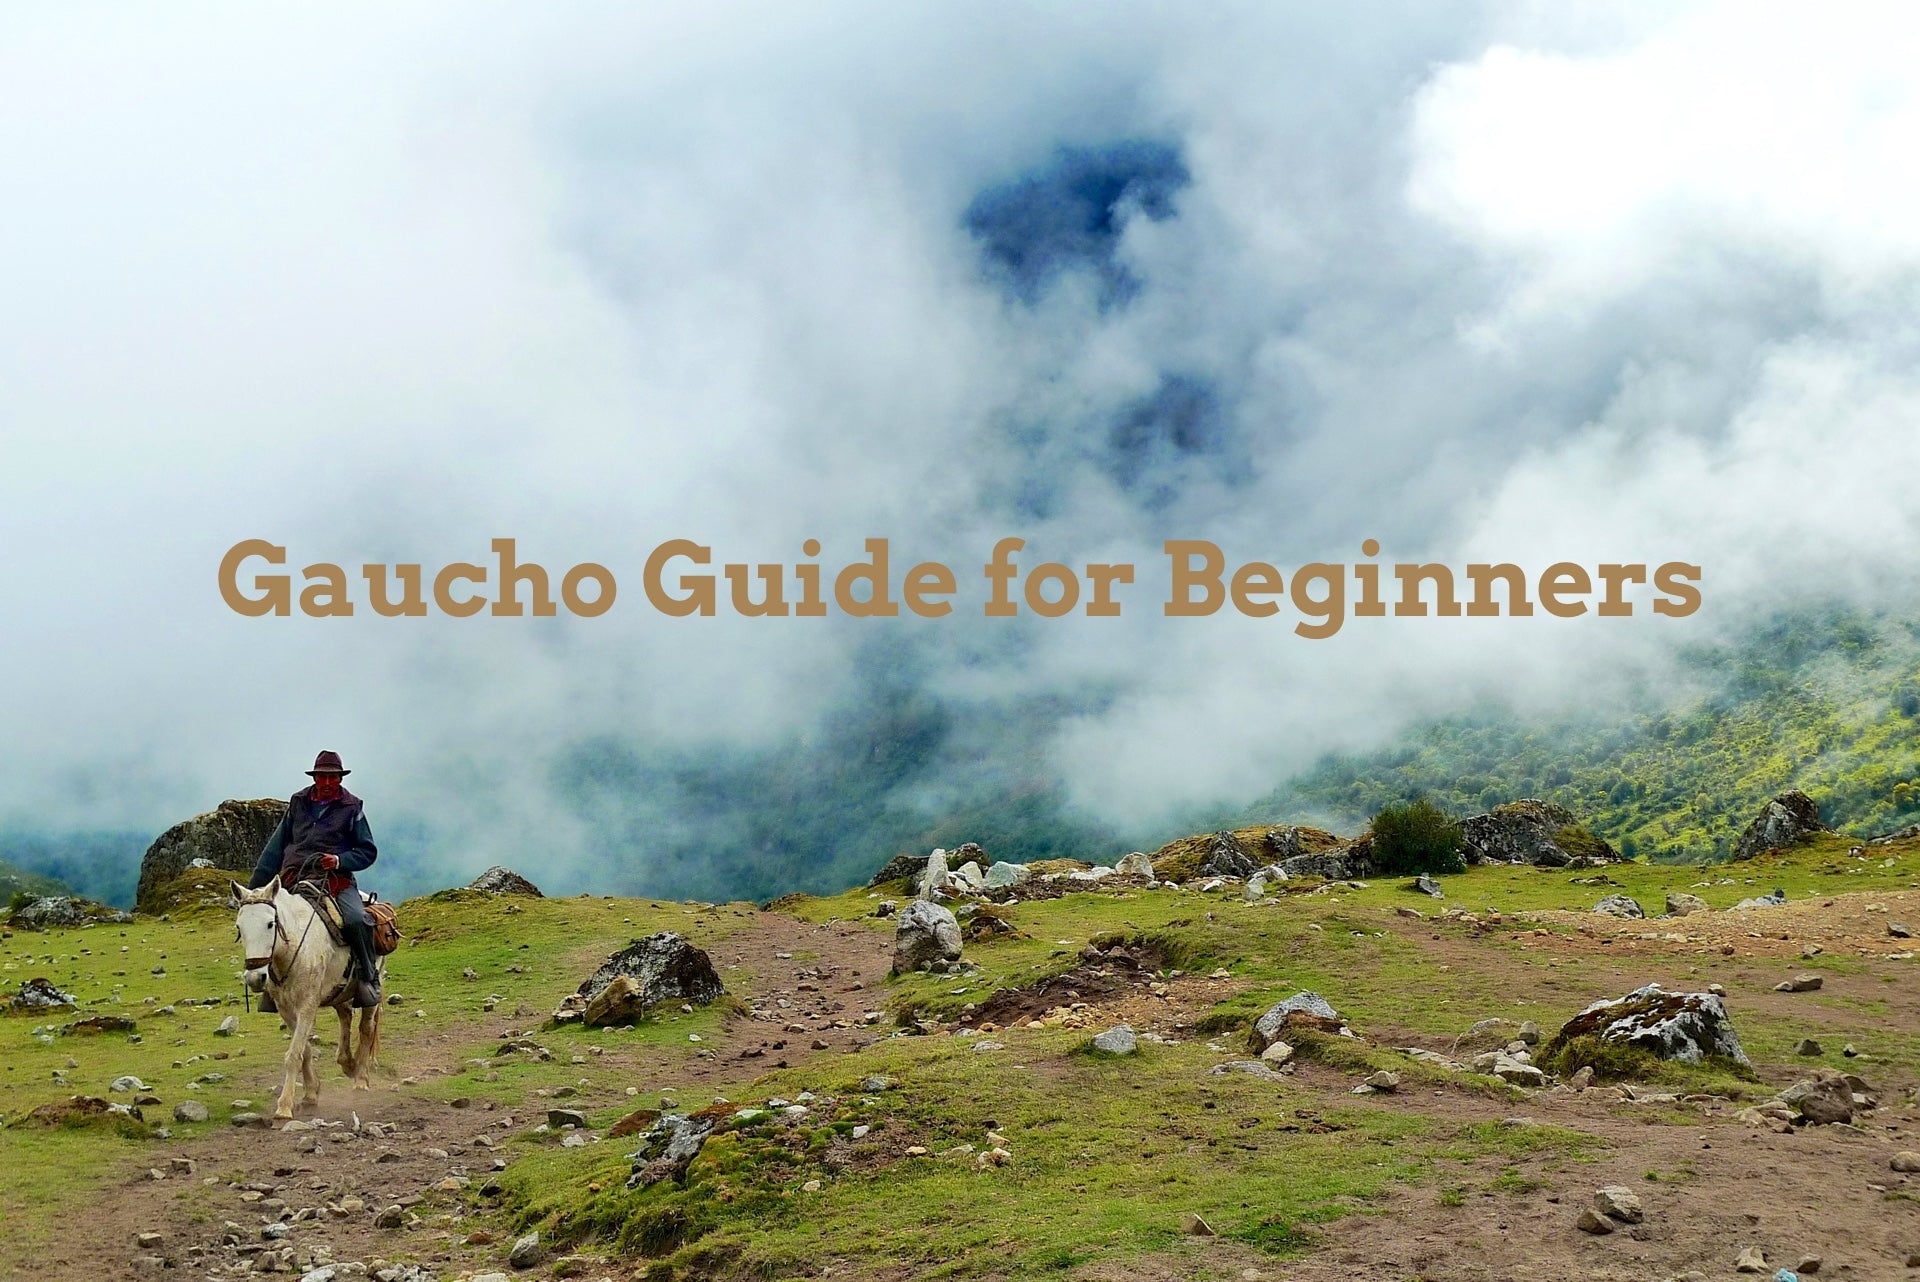 Gaucho Guide for Beginners